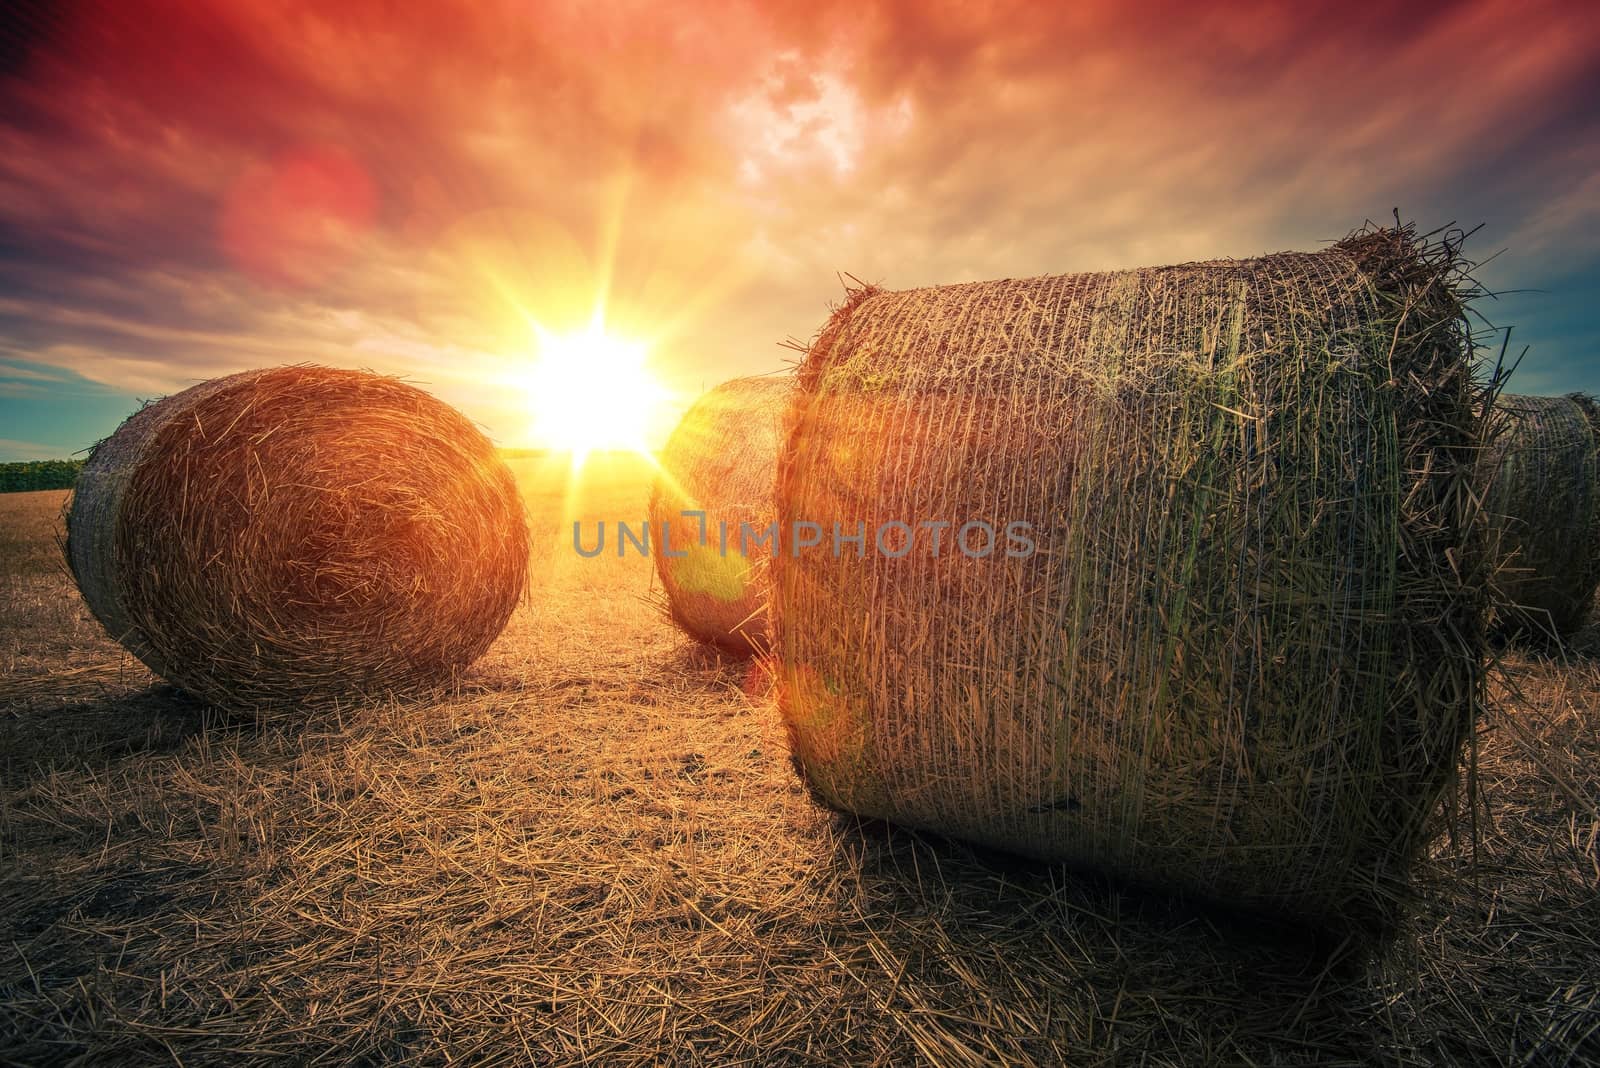 Baled Hay Rolls at Sunset. Hay Bales Countryside Landscape.